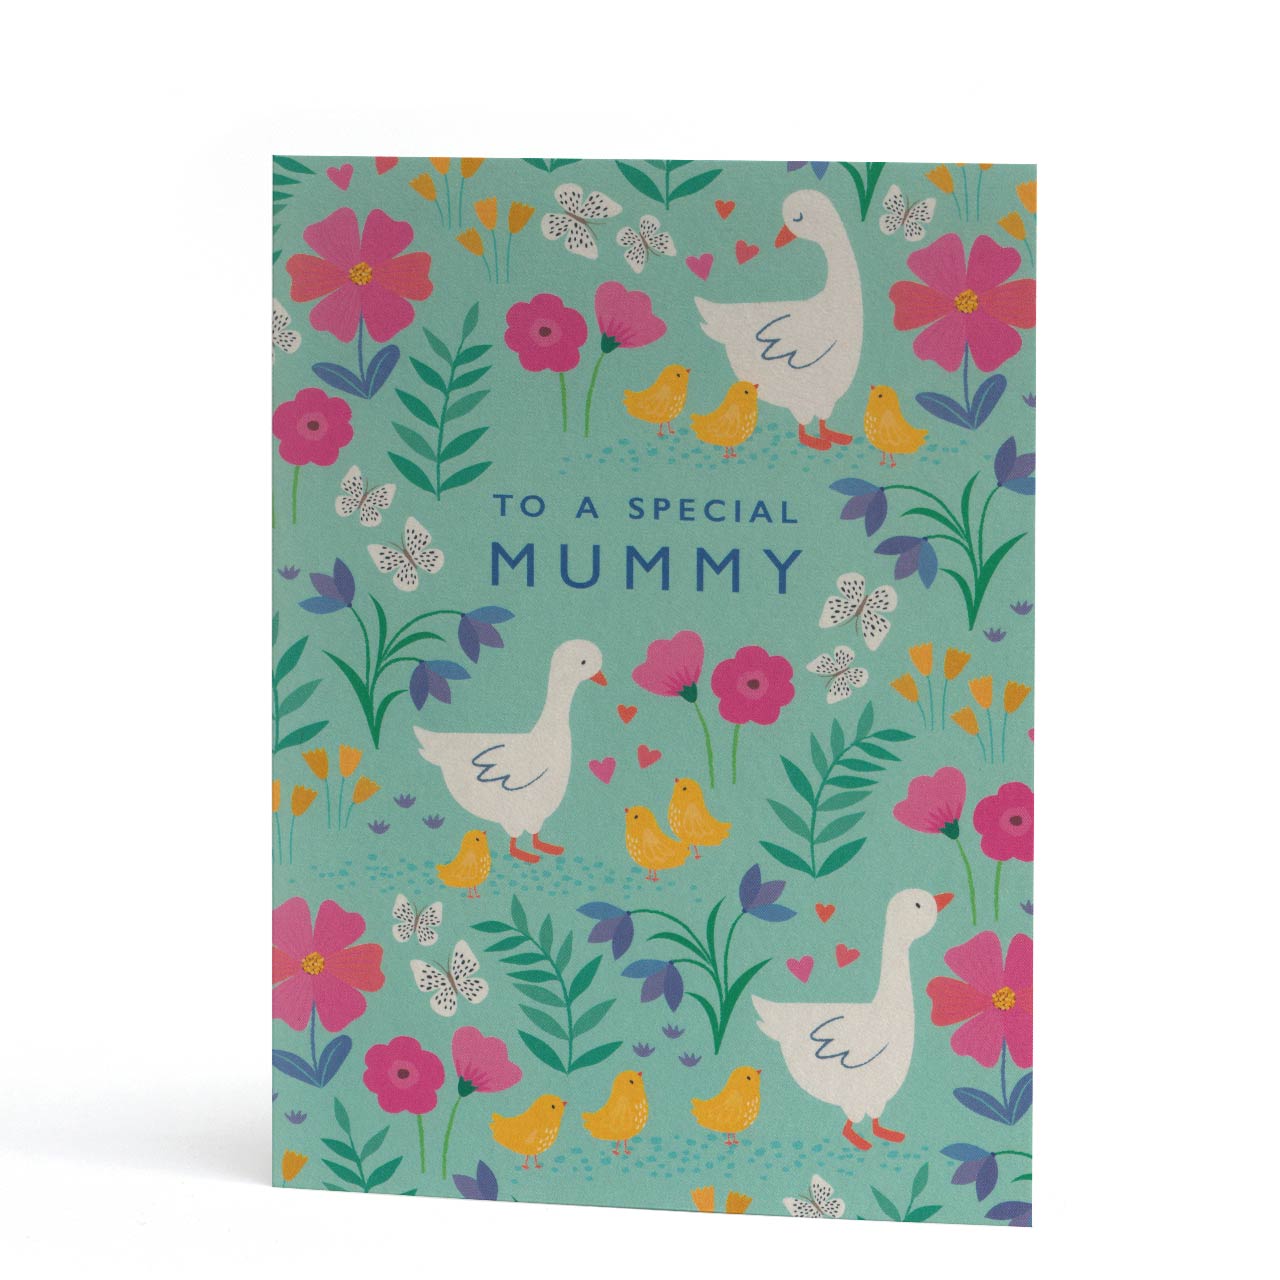 To A Special Mummy Greeting Card